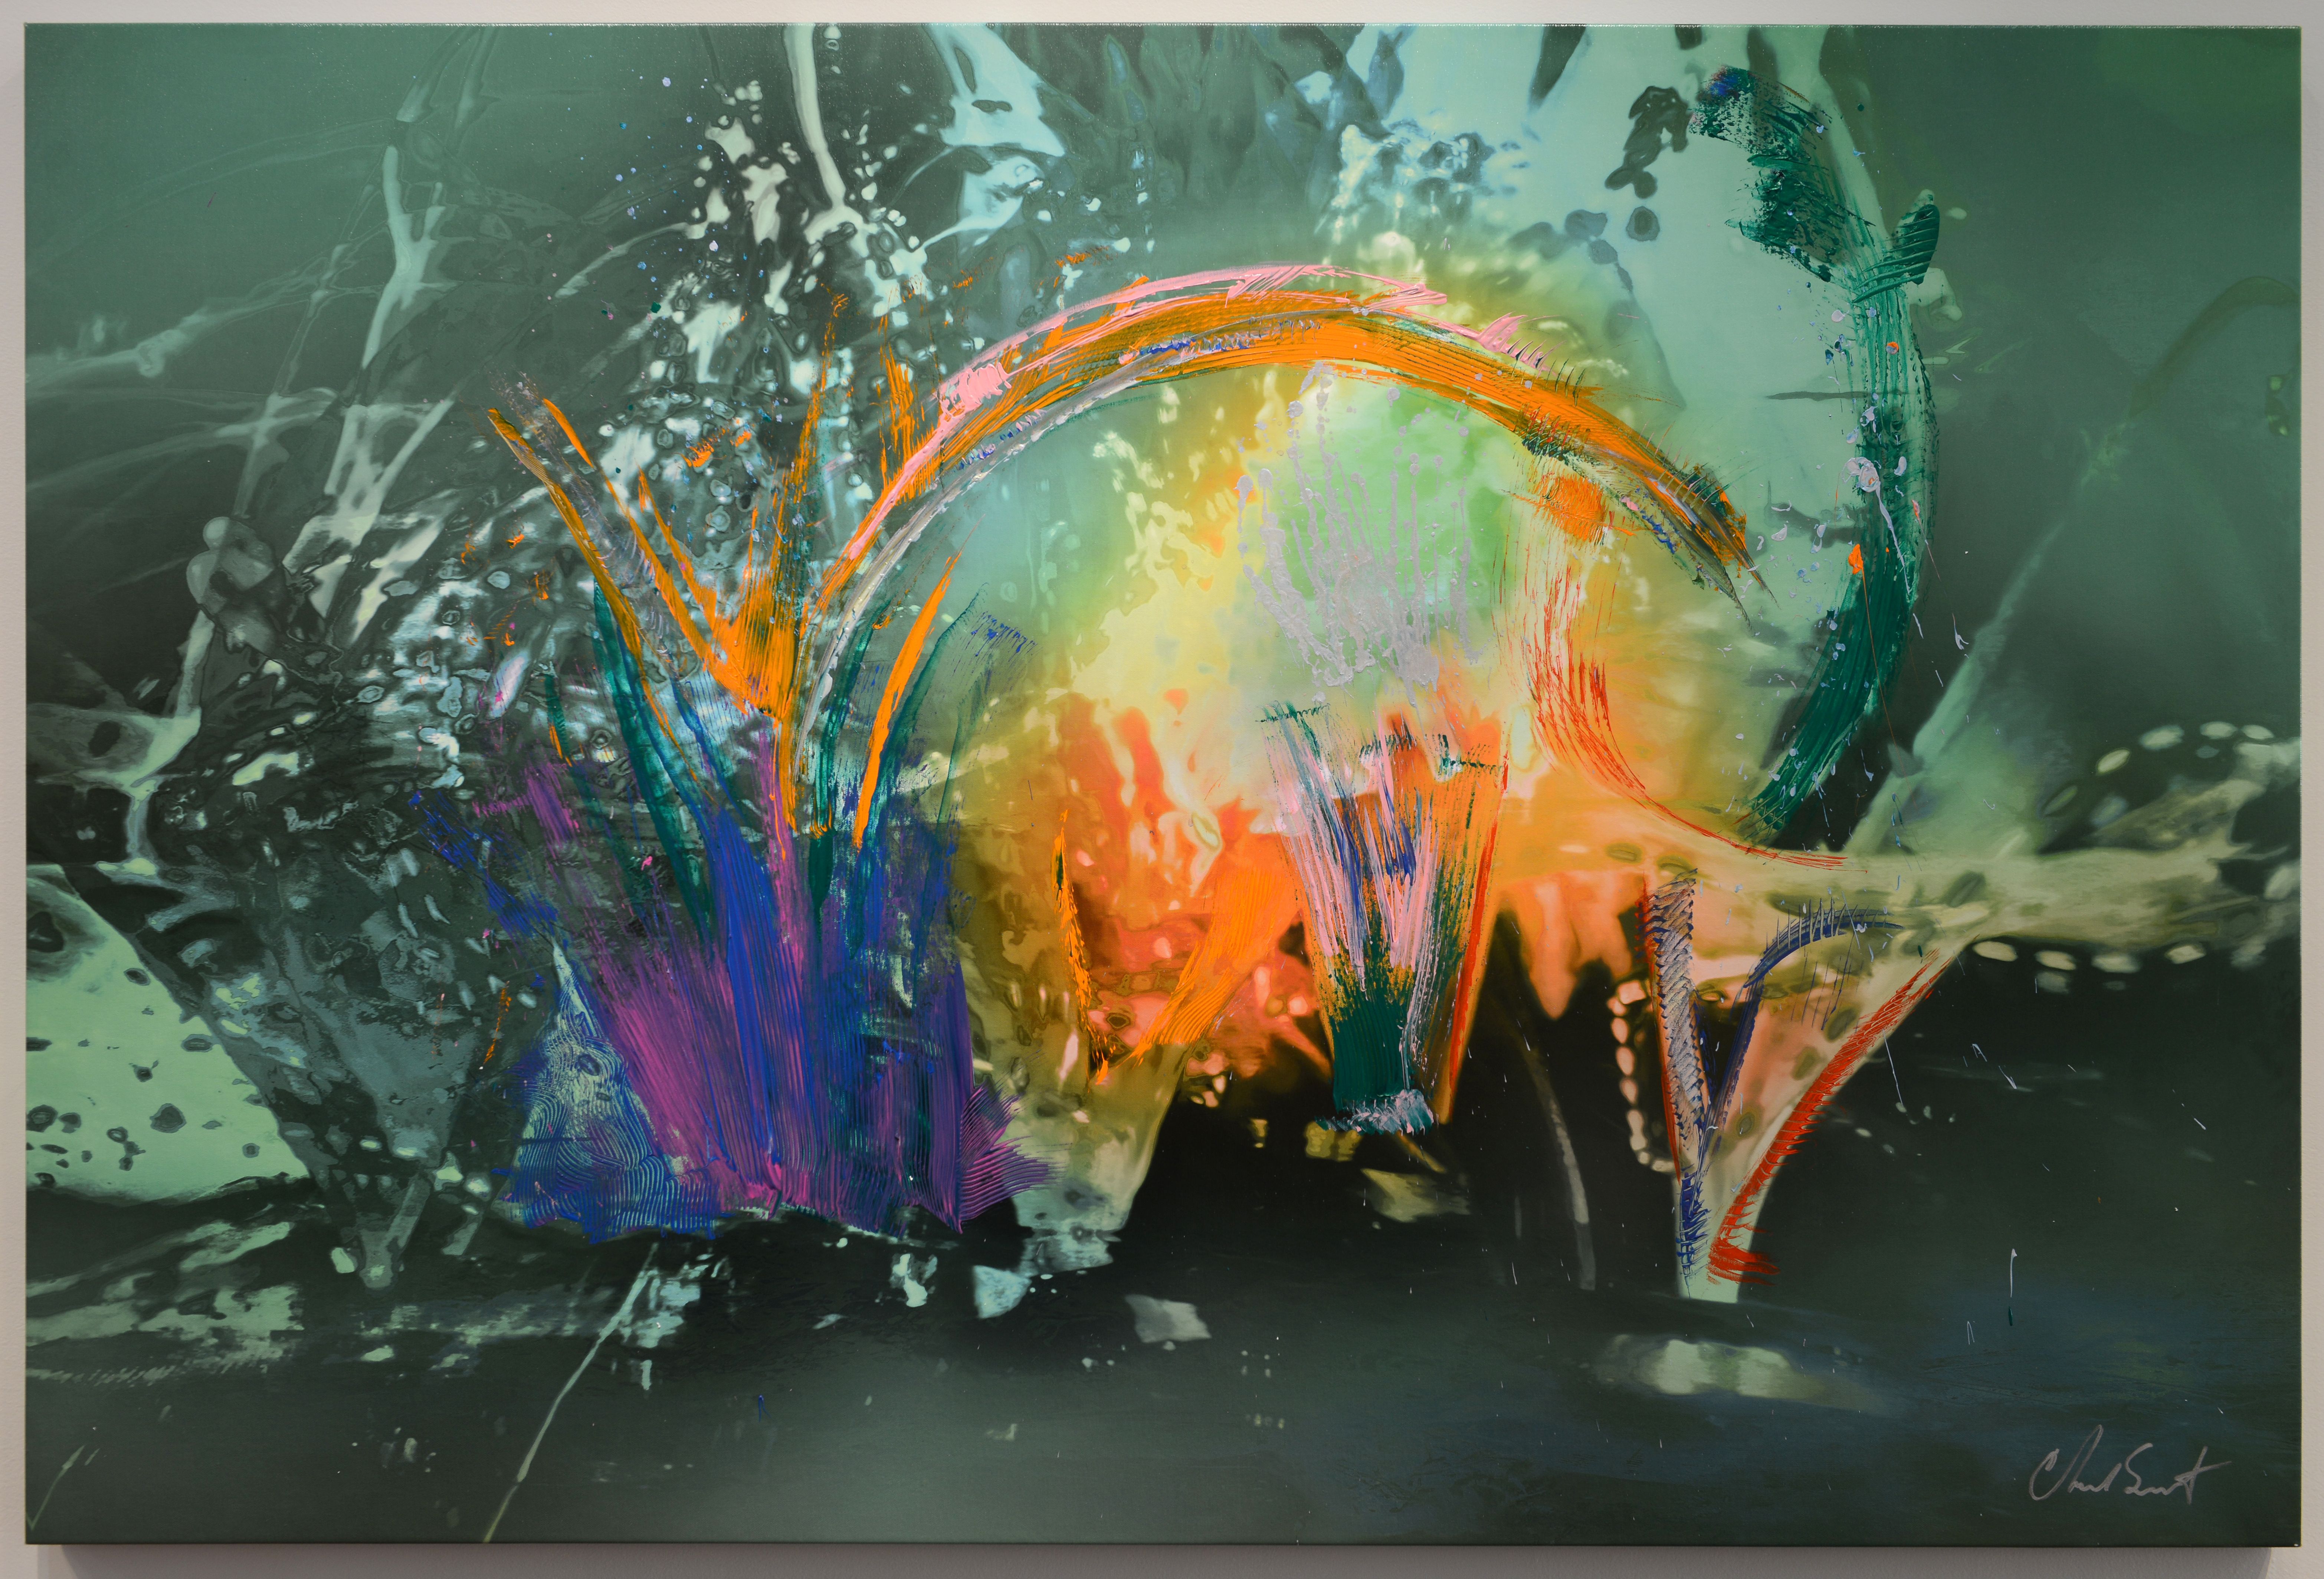 CHAD SMITH - Thirsty - Mixed Media on Canvas - 40x60 inches